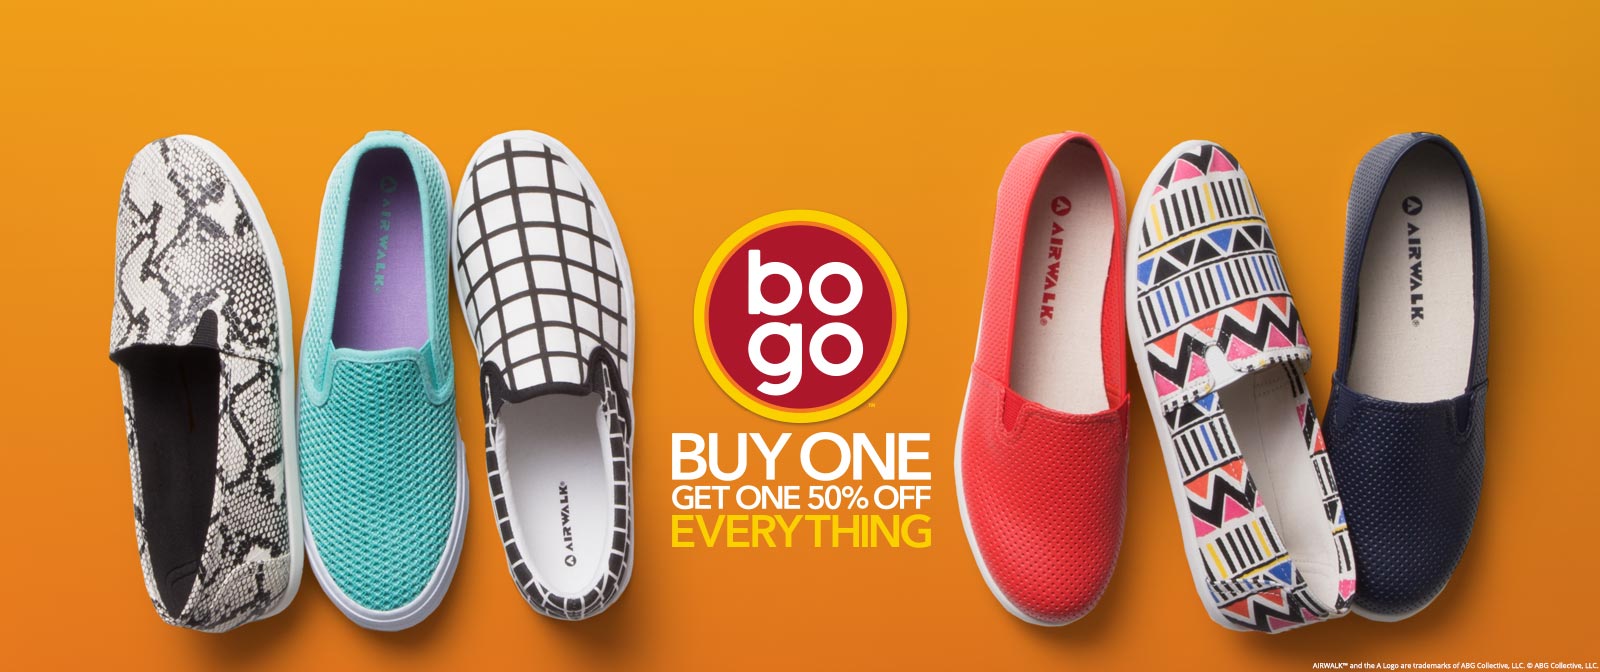 Payless Shoe Source B1G1 50% OFF Sale + 